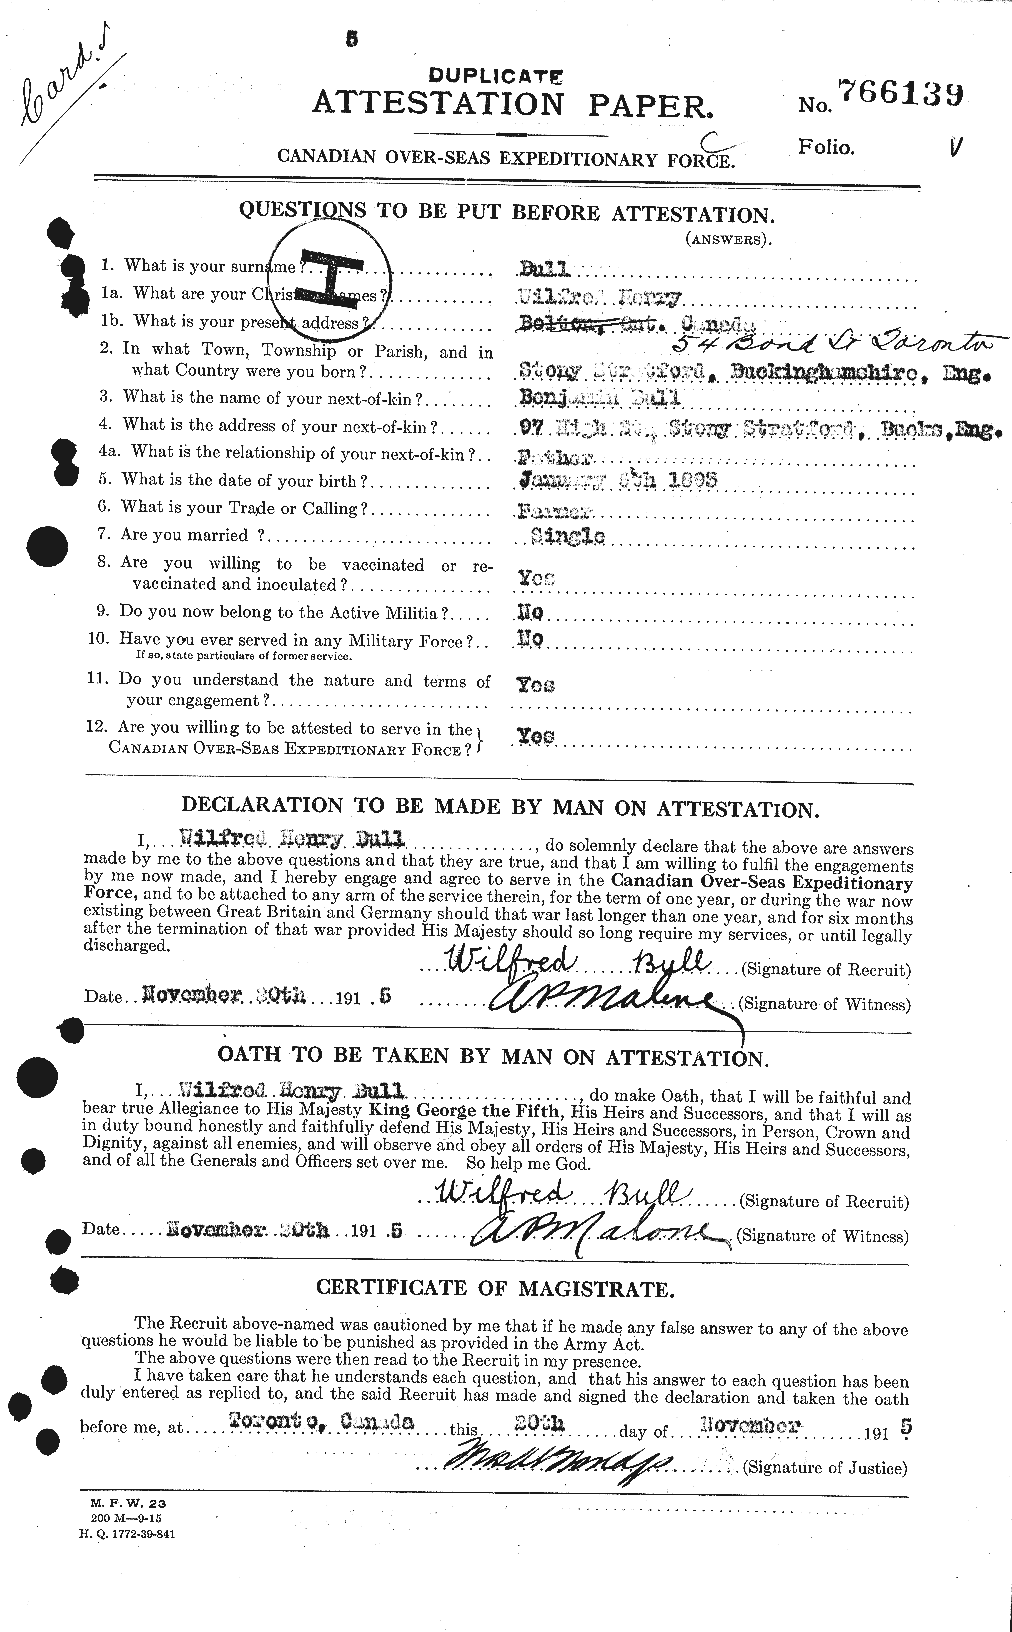 Personnel Records of the First World War - CEF 273456a